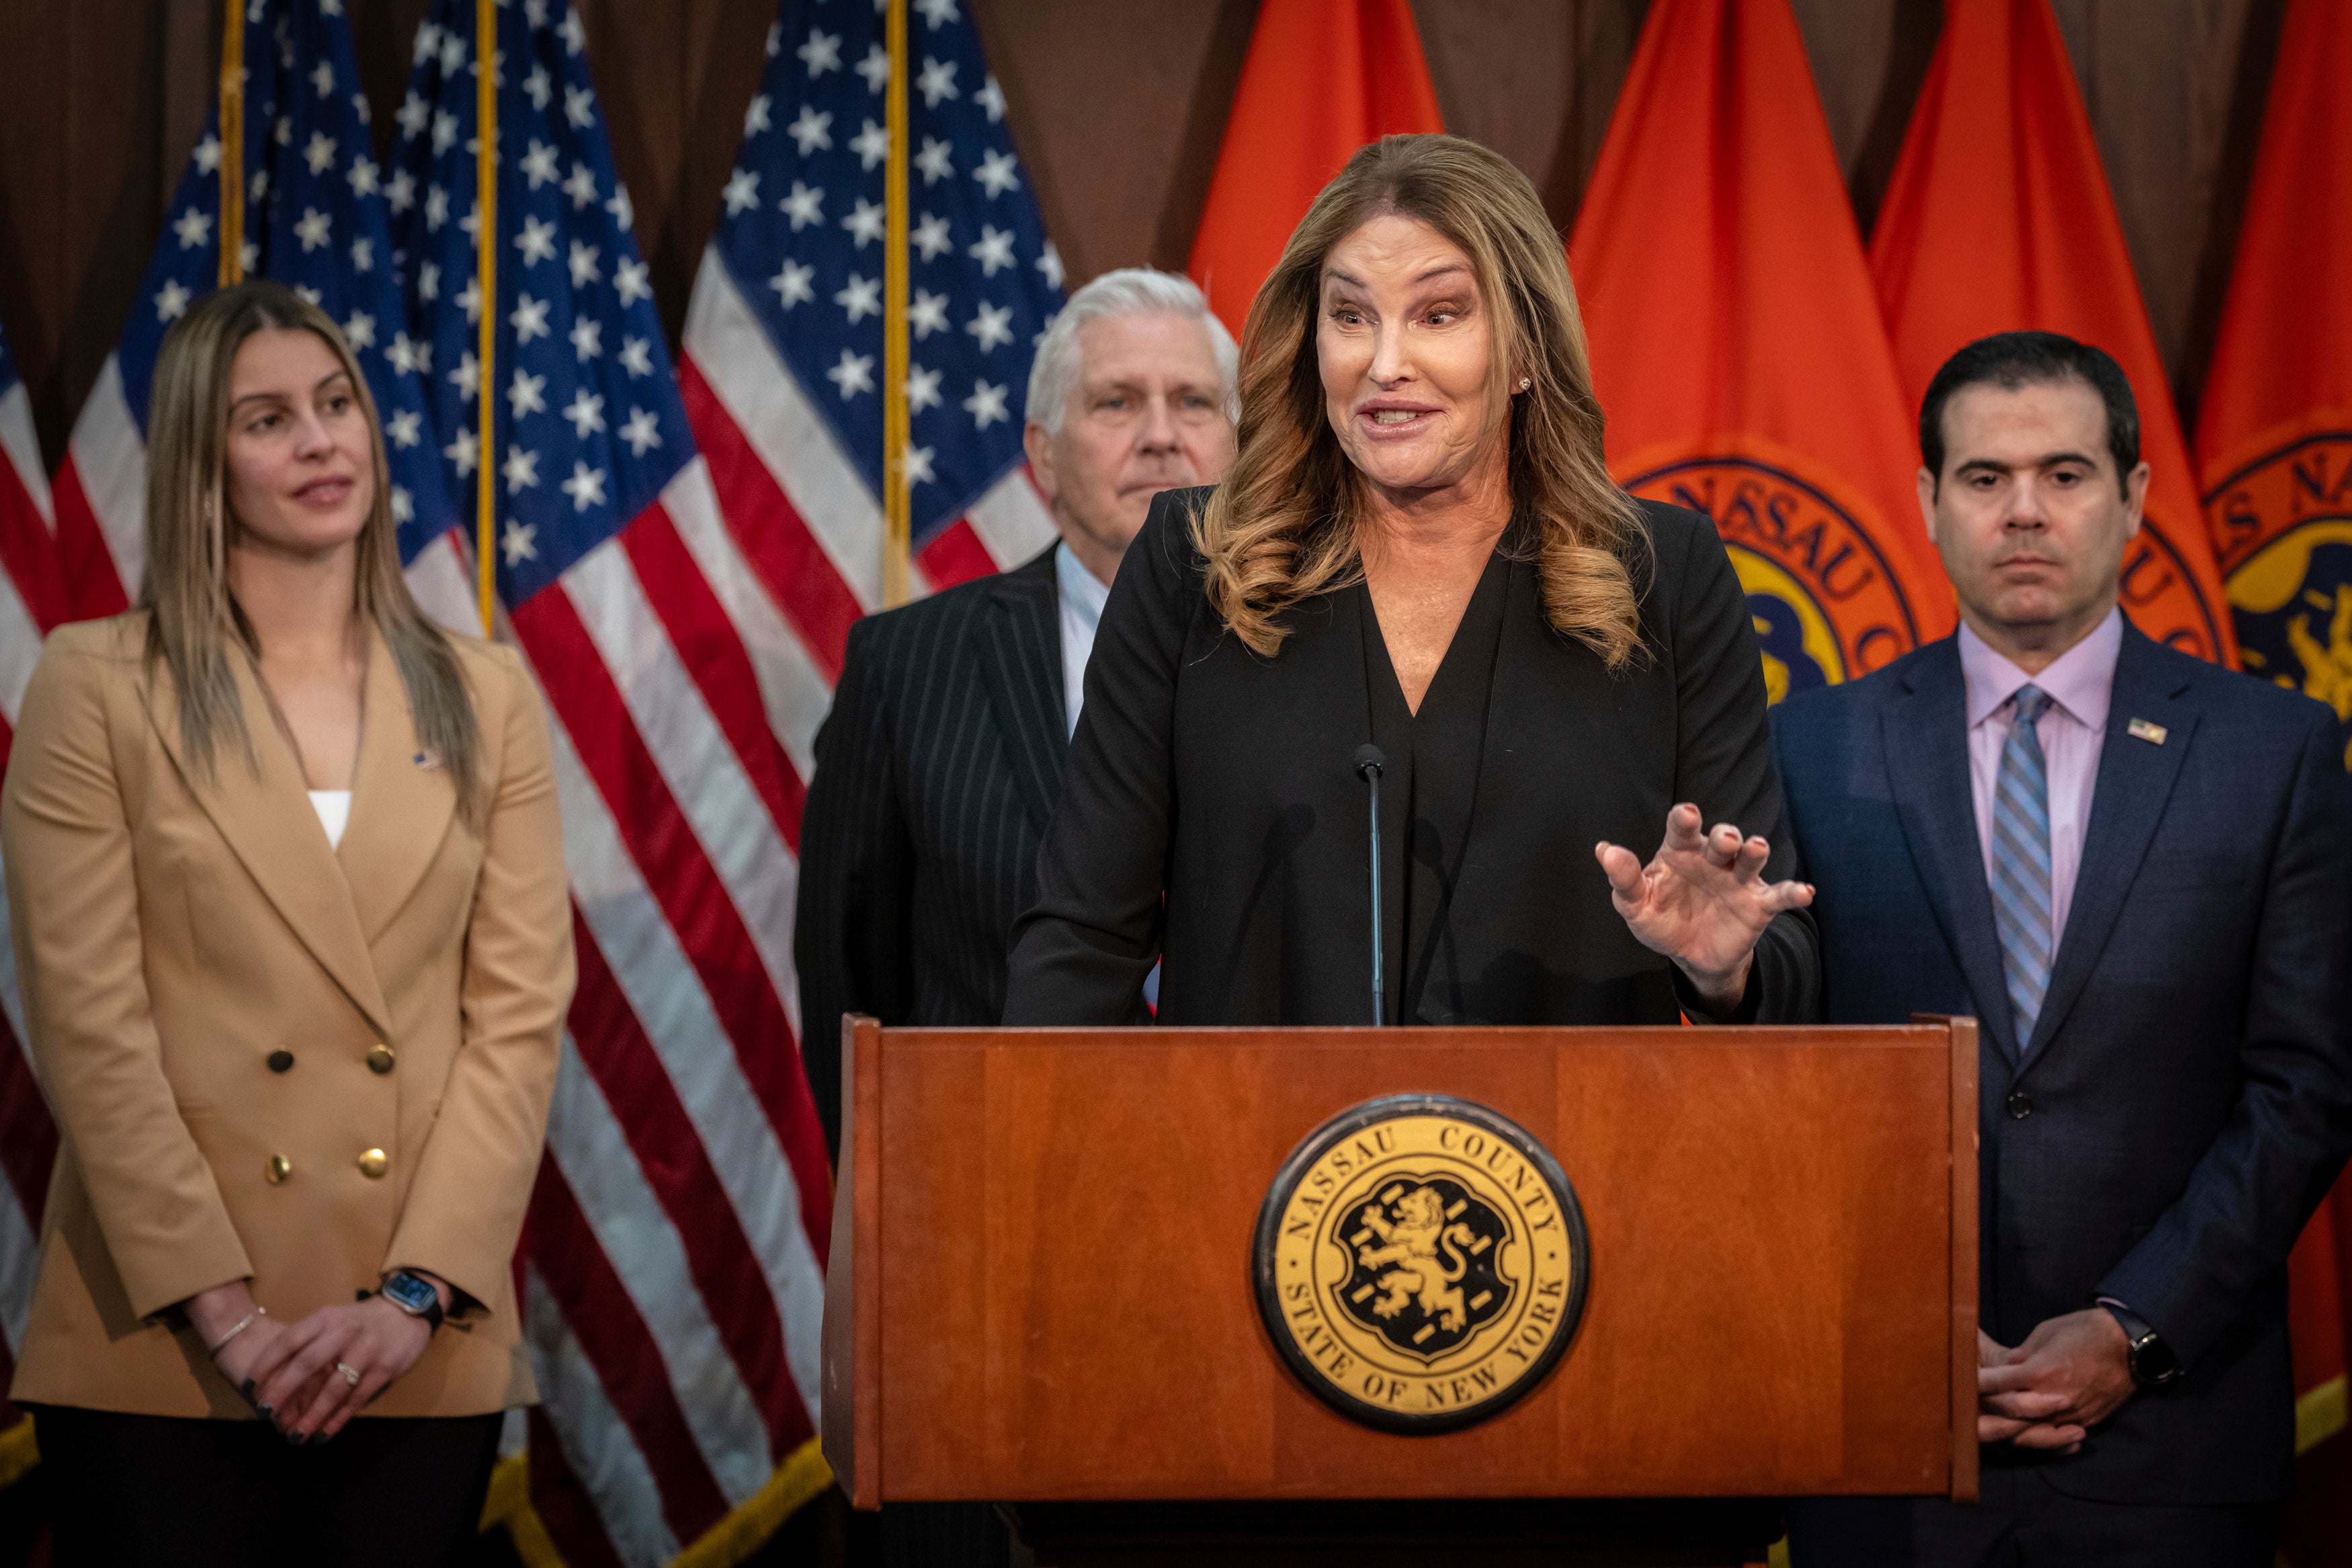 Trans woman Caitlyn Jenner backed a New York county's ban on transgender female athletes